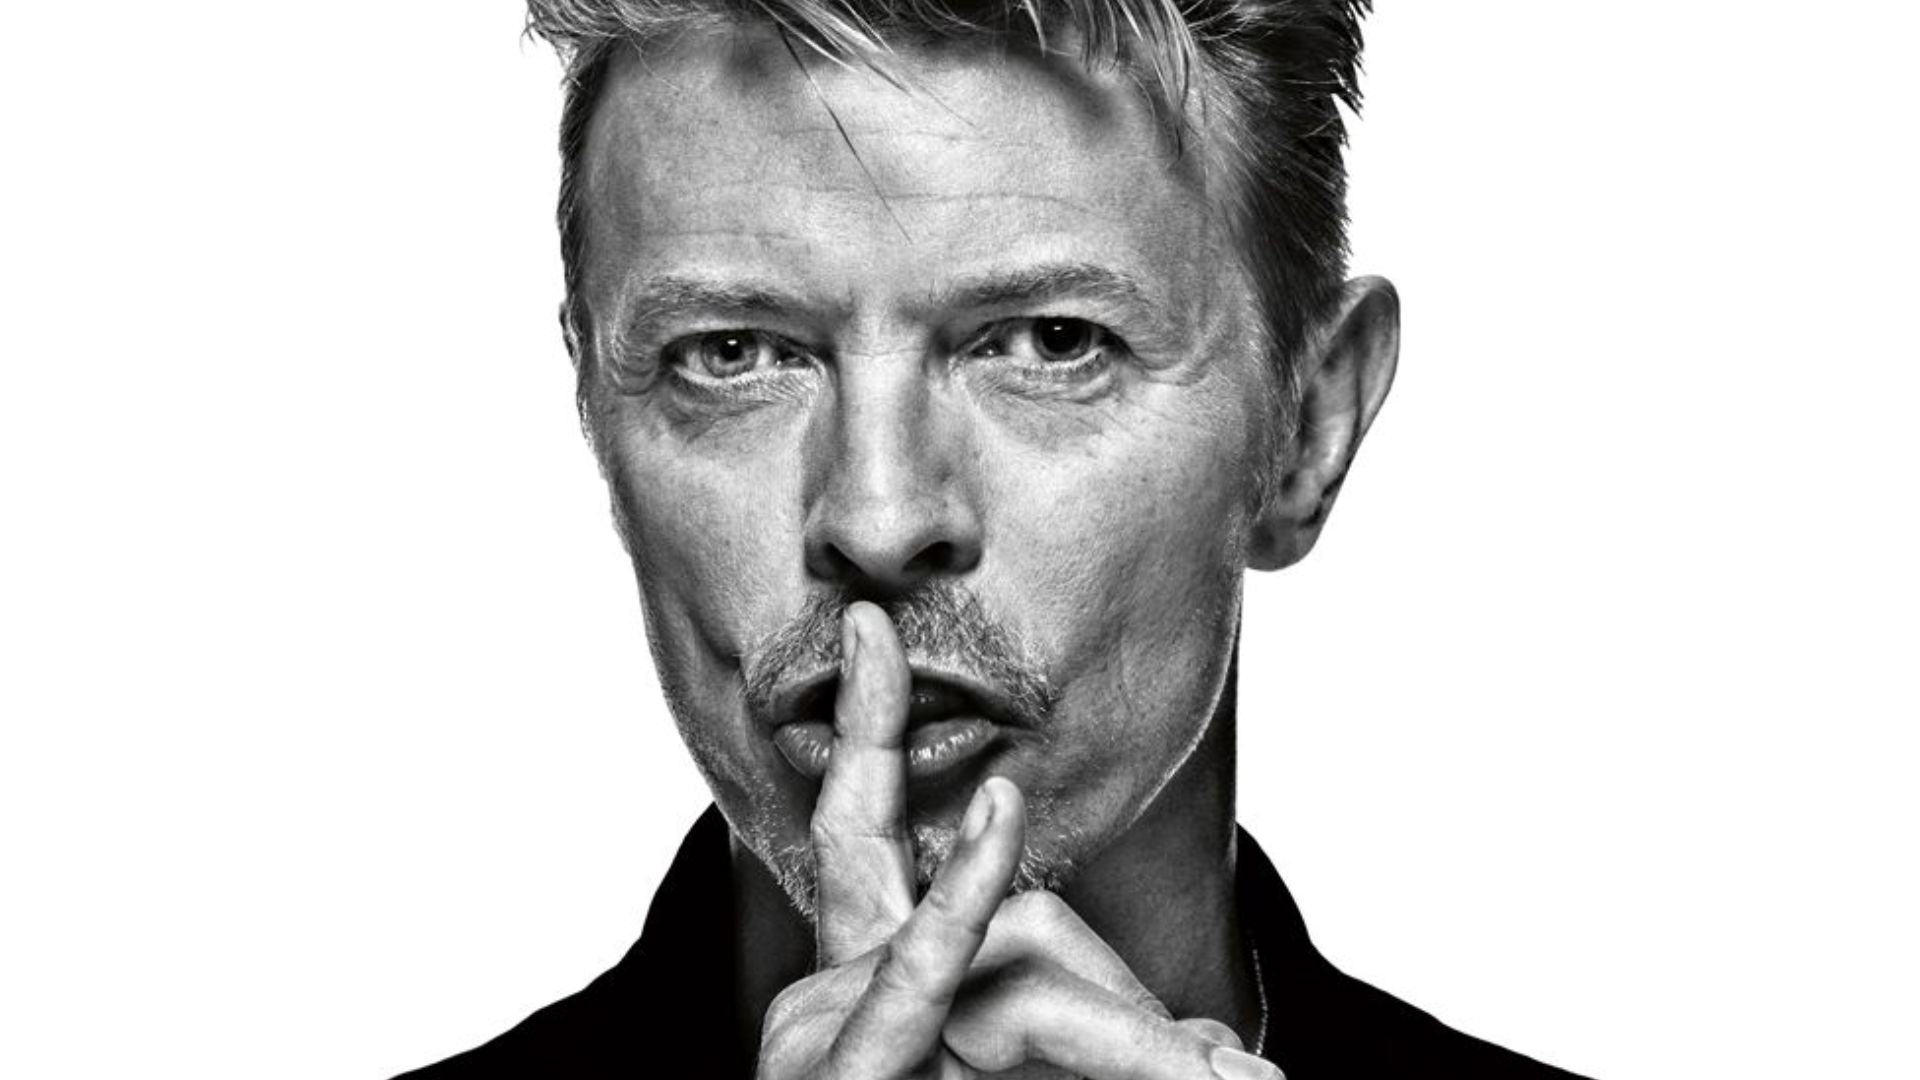 David Bowie Signaling To Stay Quiet